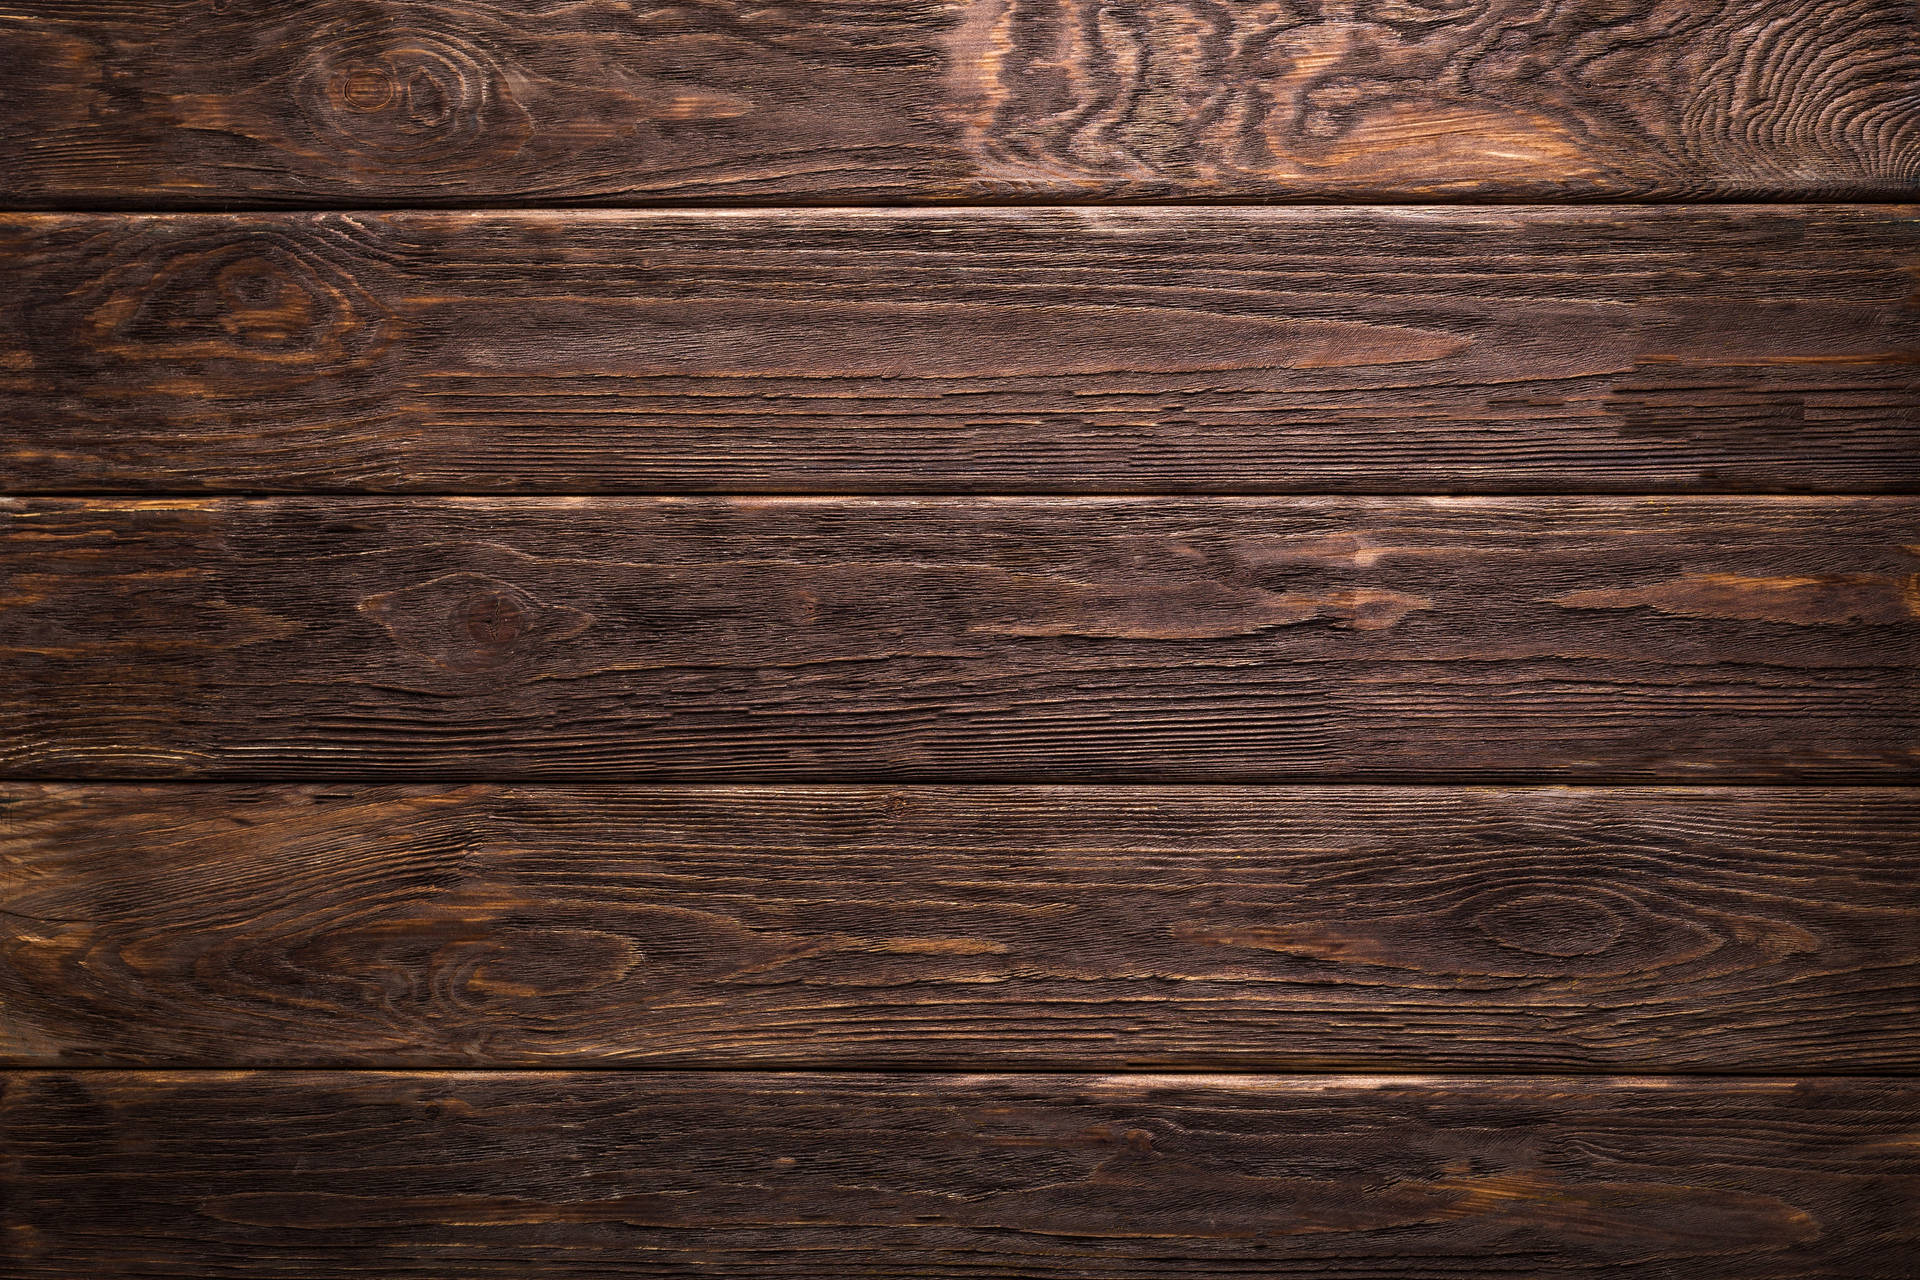 The Rustic Beauty of Textured Wood Wallpaper